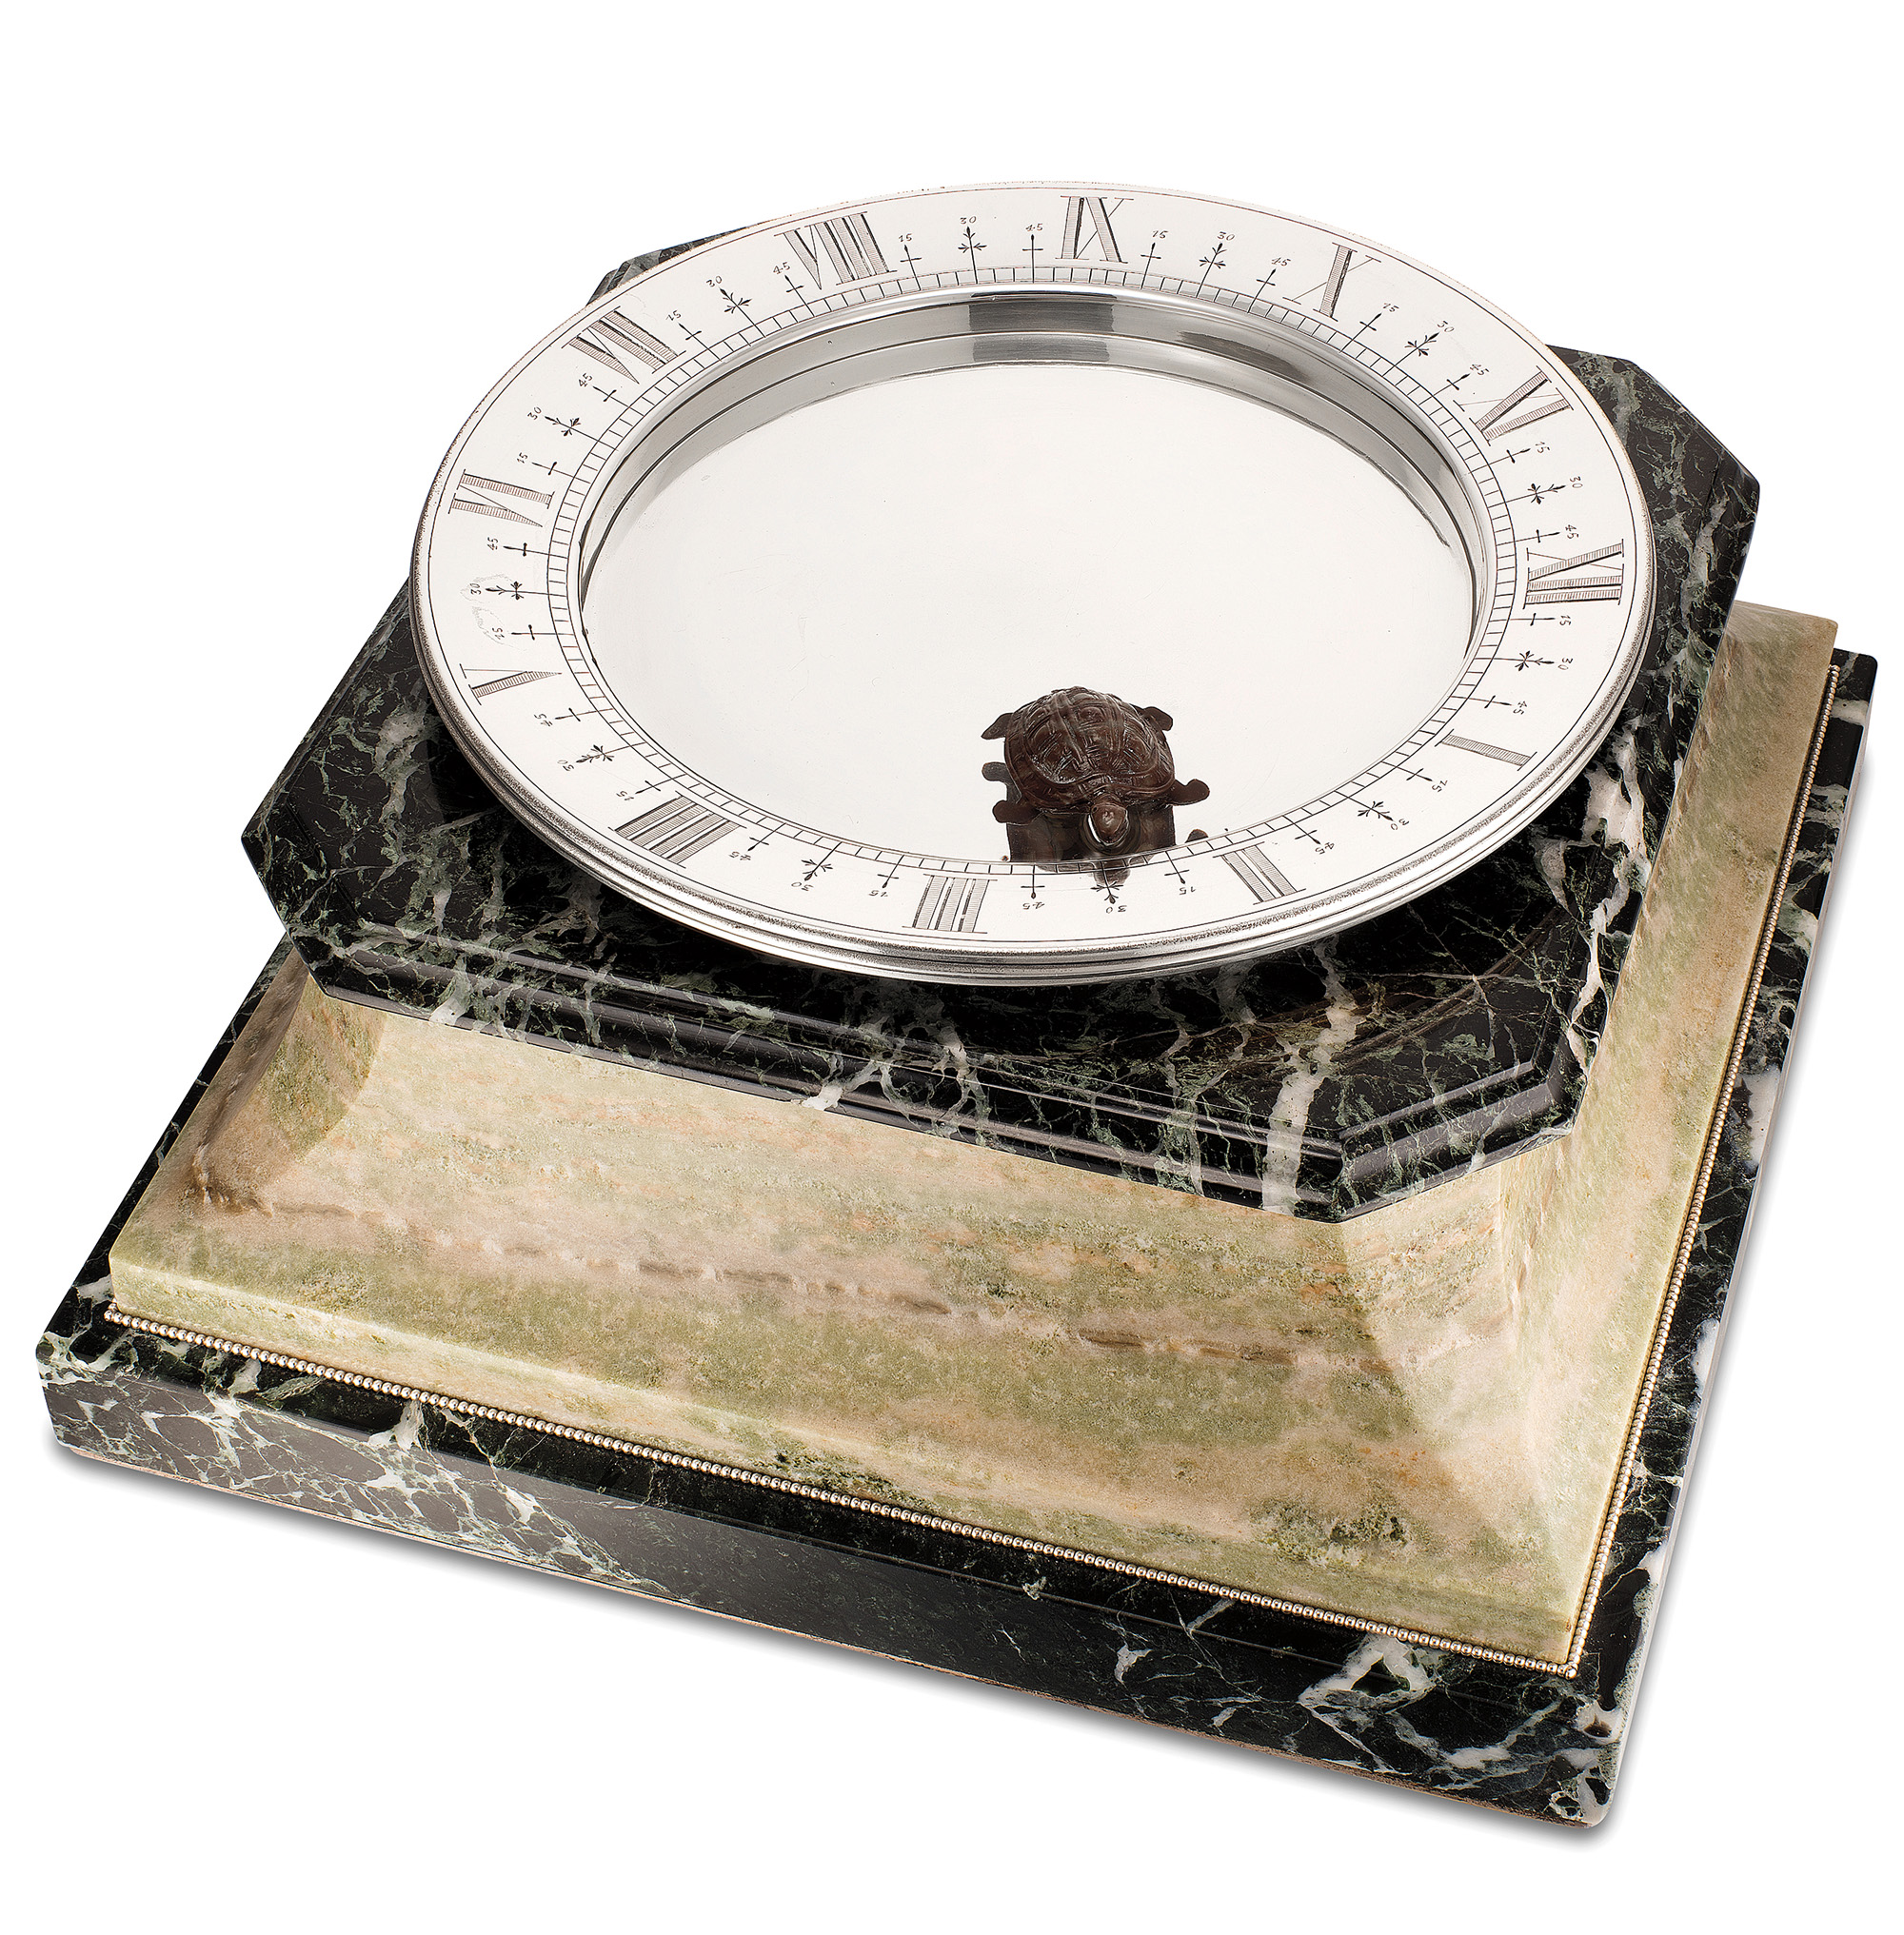 Extremely rare and unusual, silver and marble magnetic floating table clock by Cartier. Sold for $487,540